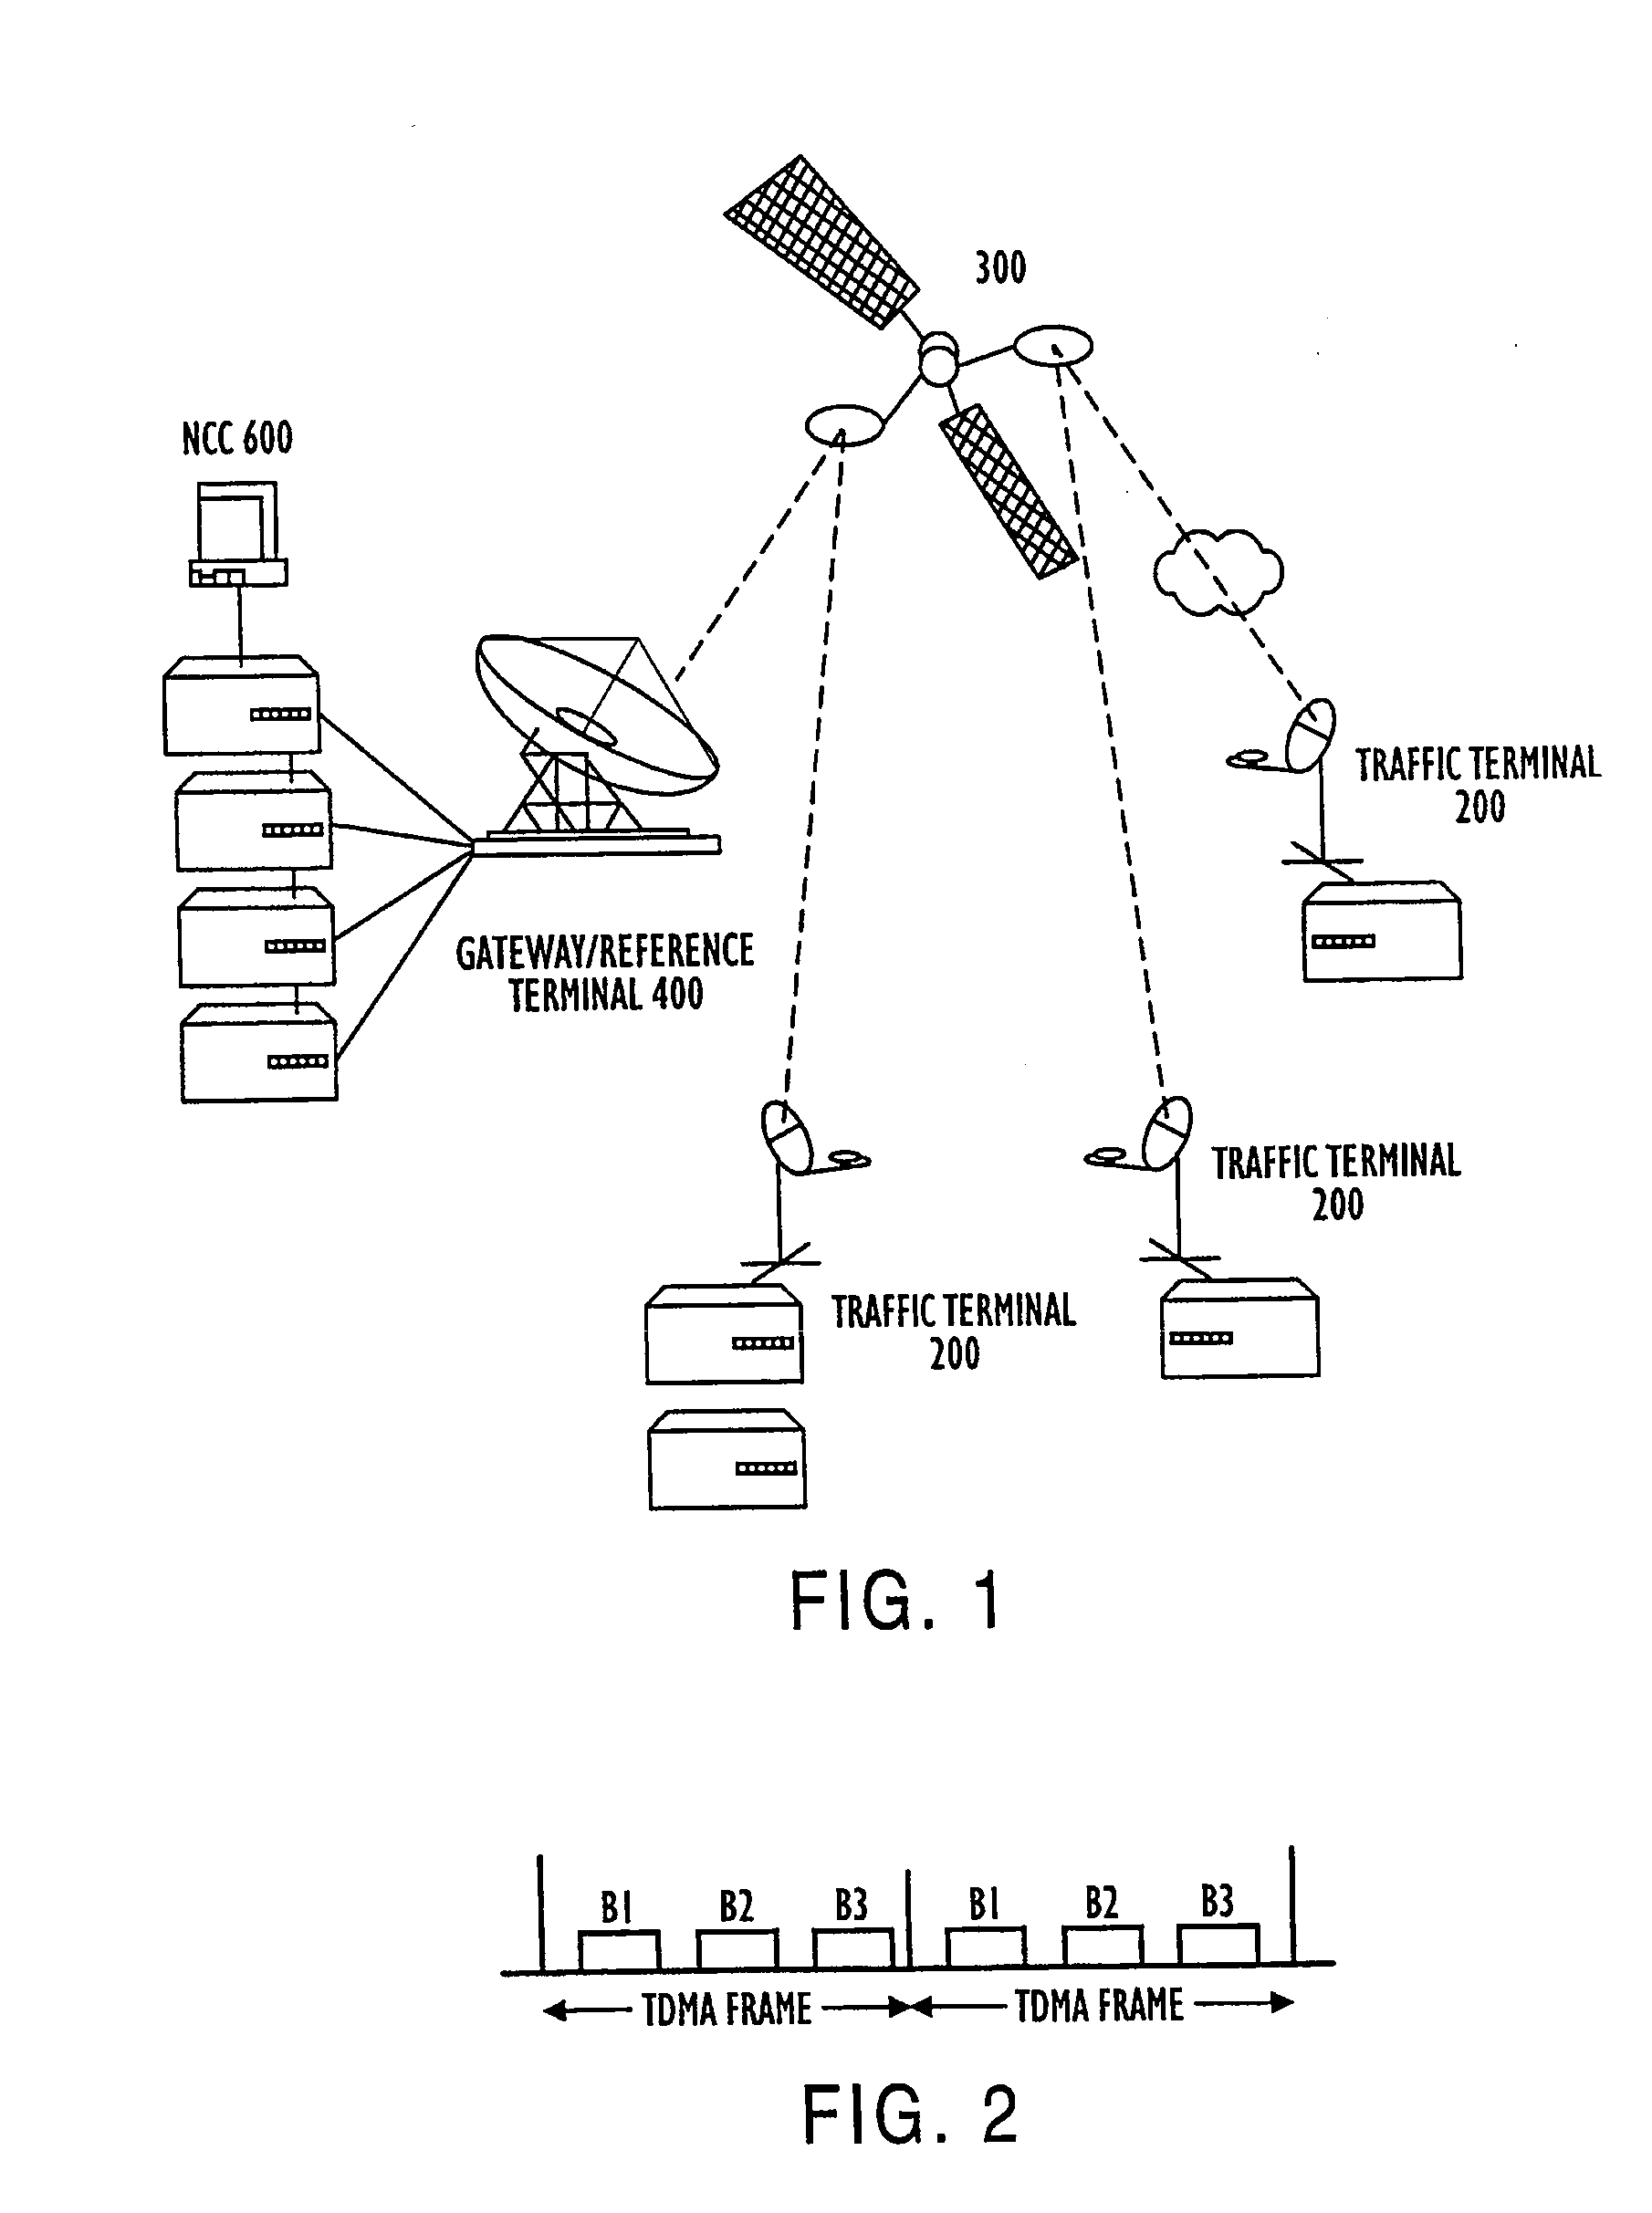 Method for uplink power control for distributed satellite networks to compensate for rain fade